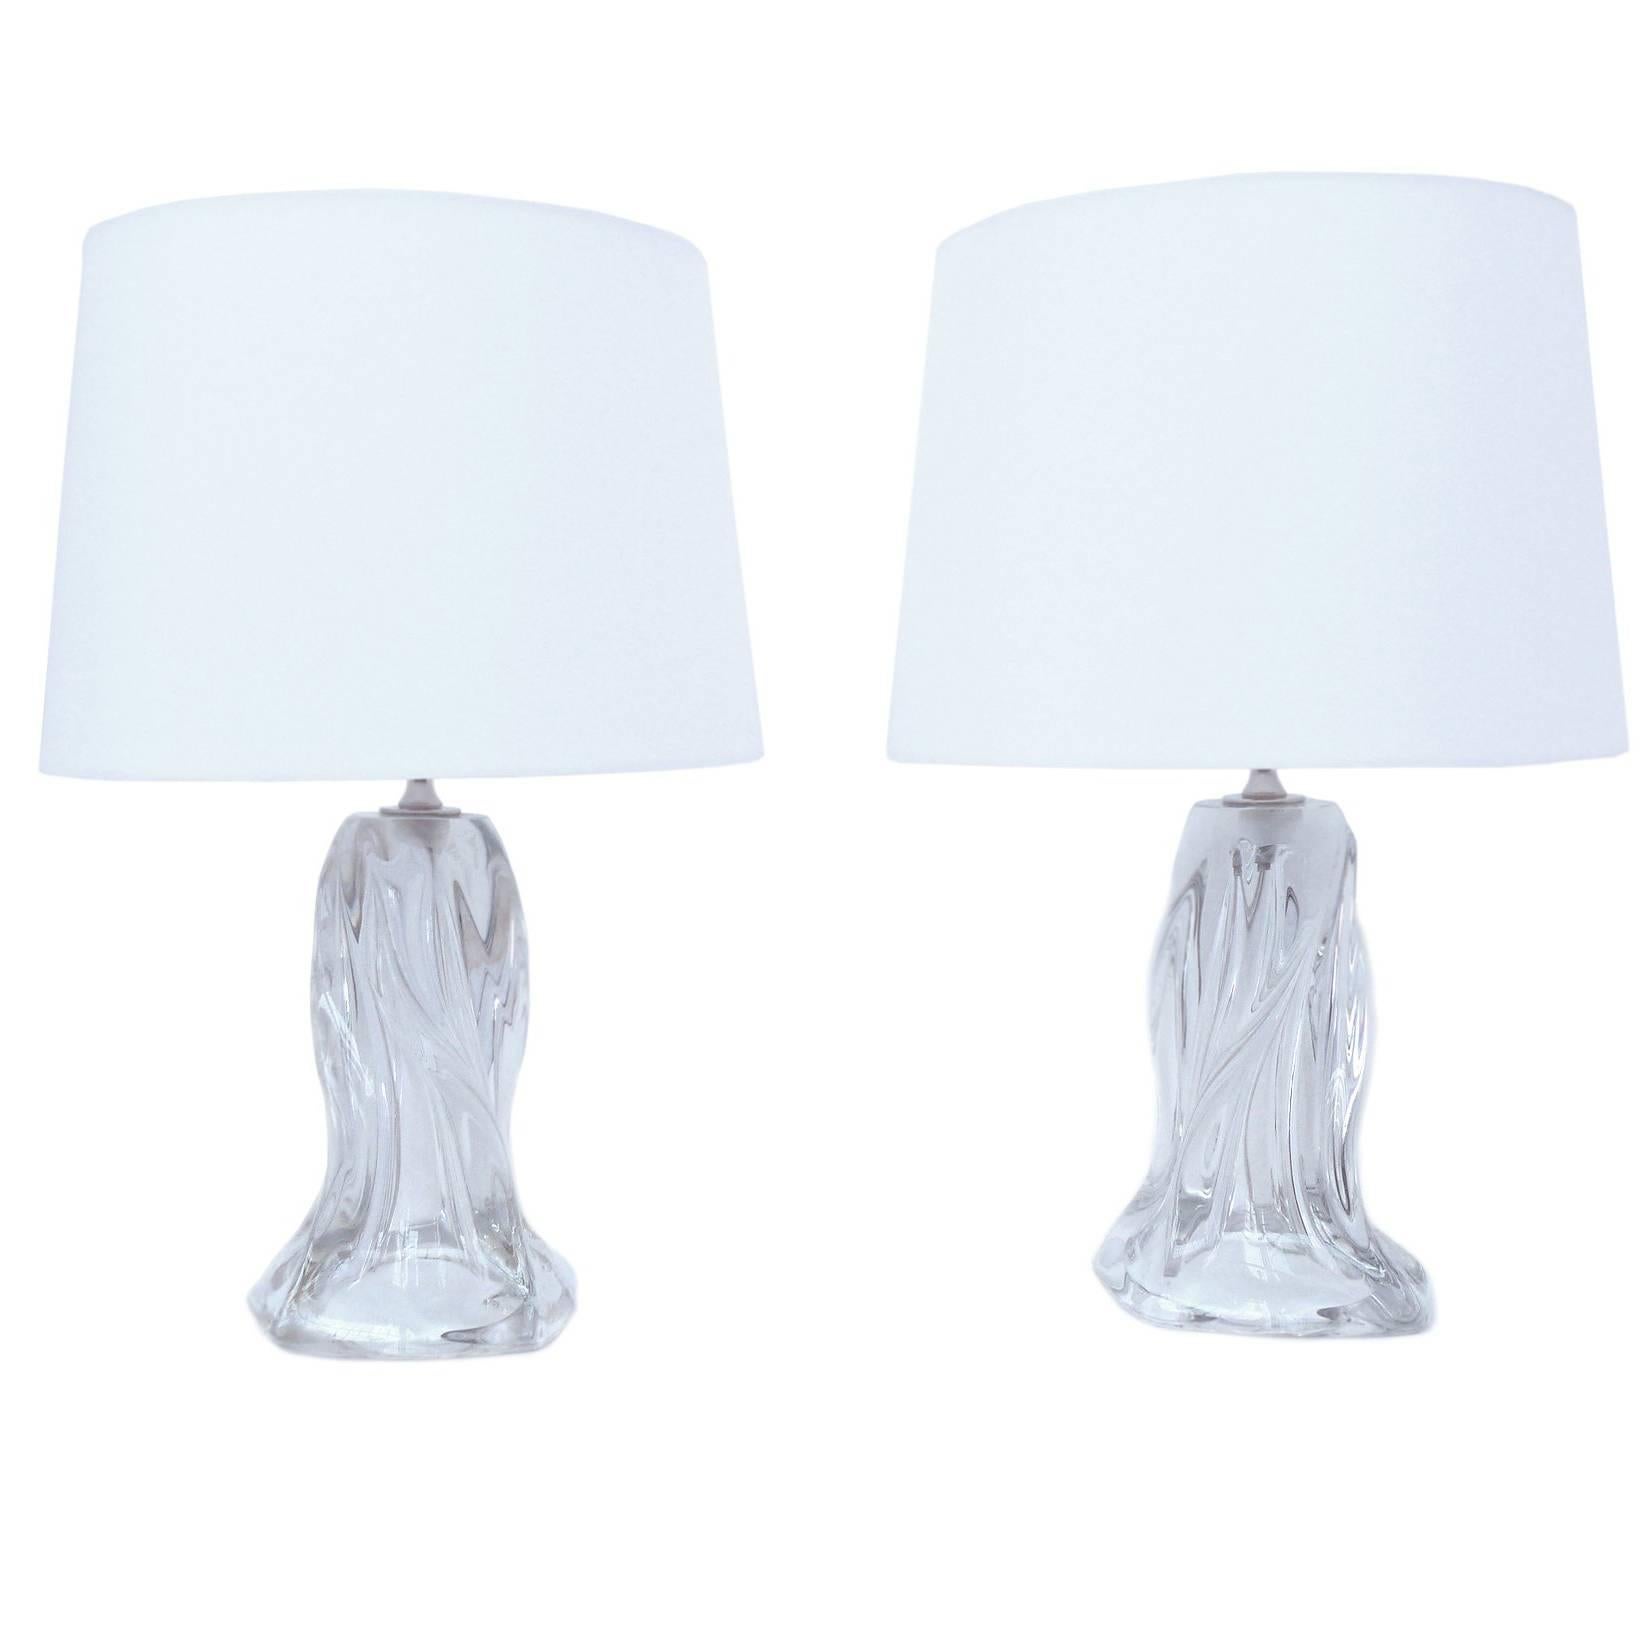 Pair of Midcentury Murano Glass Table Lamps